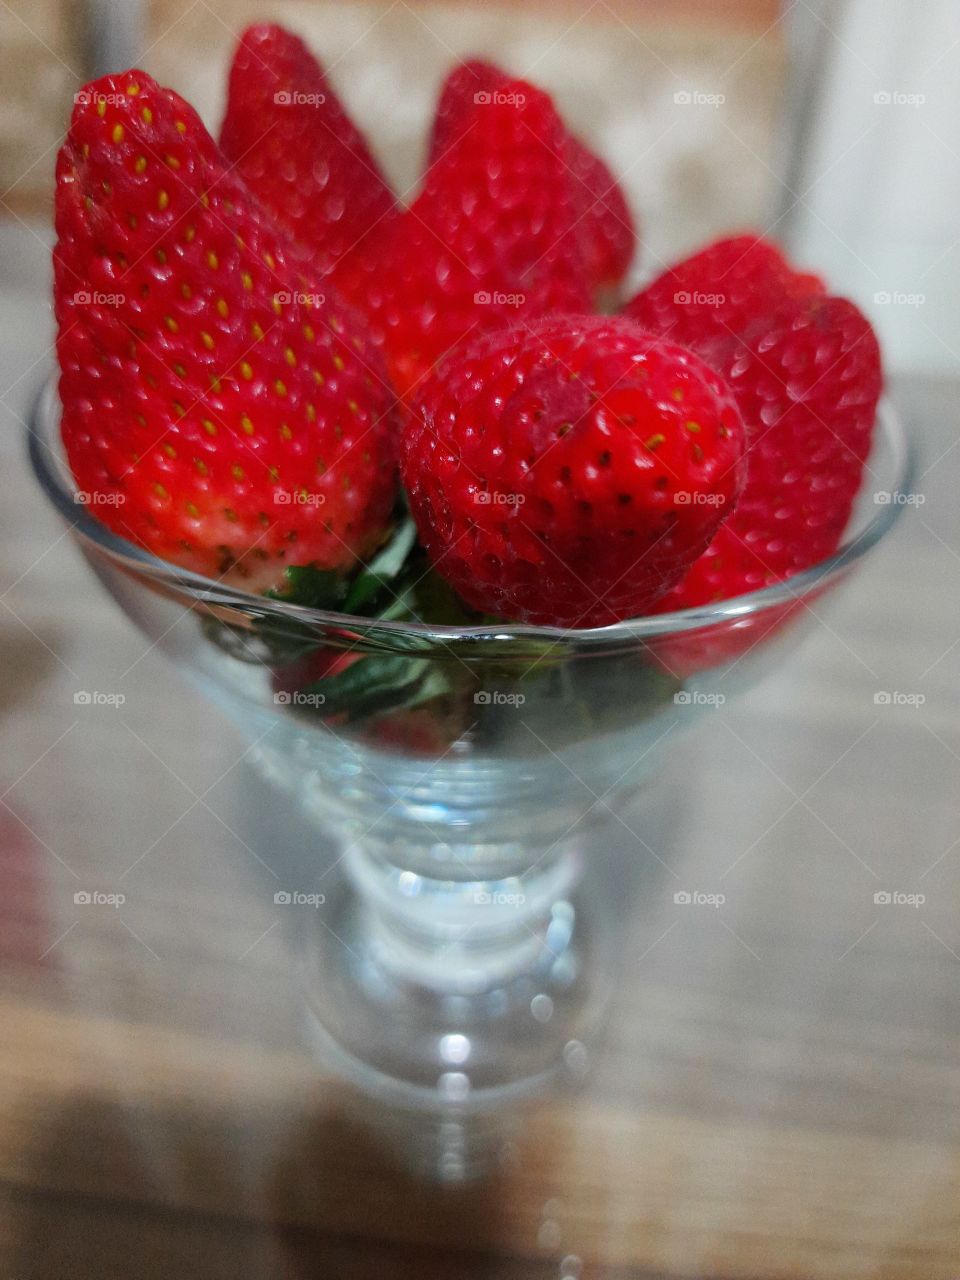 strawberries in the cup